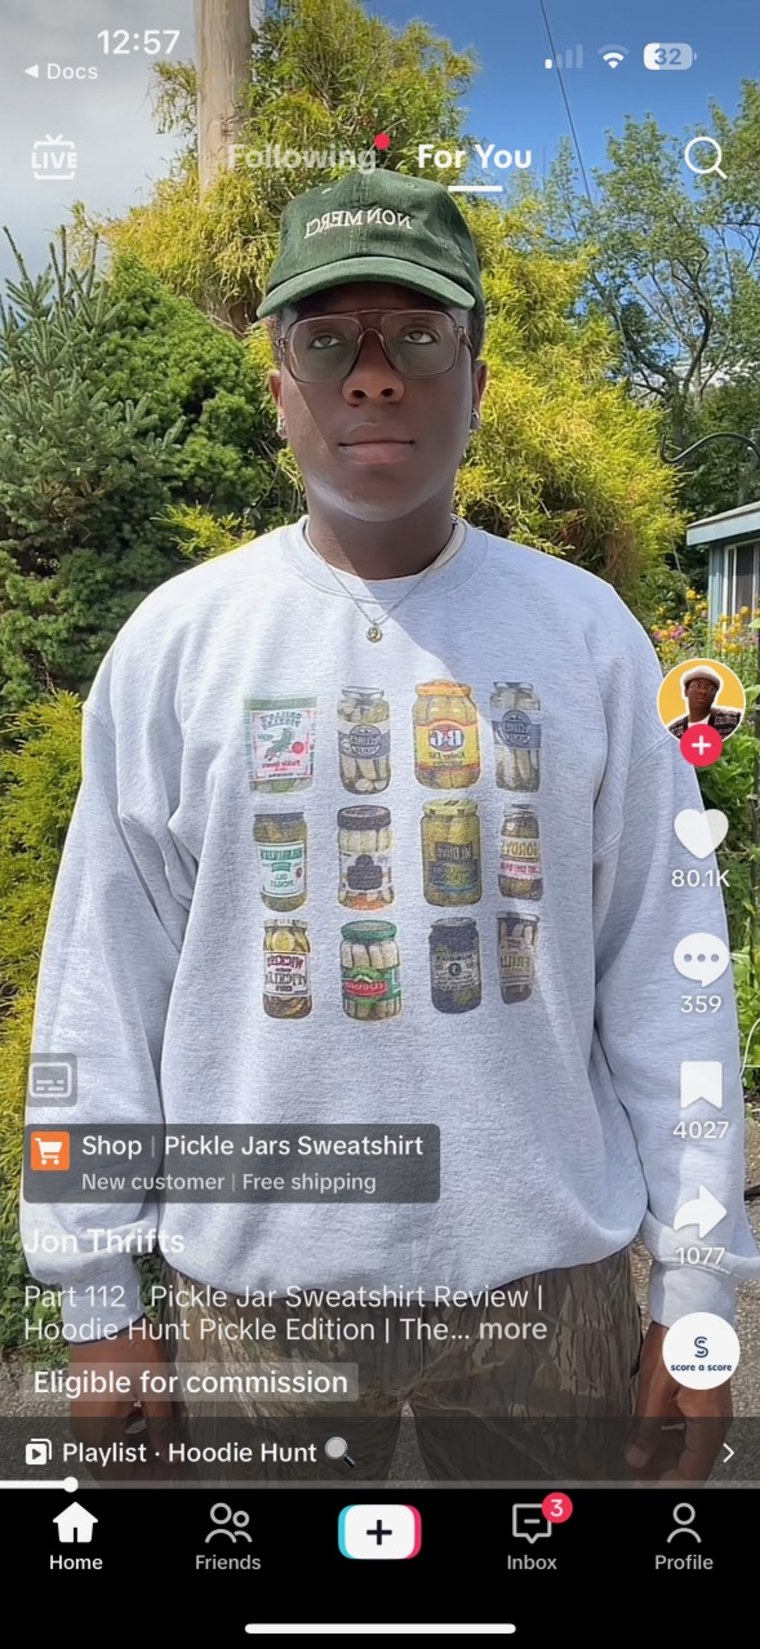 A pickle sweatshirt video that includes and "eligible for commission" tag.